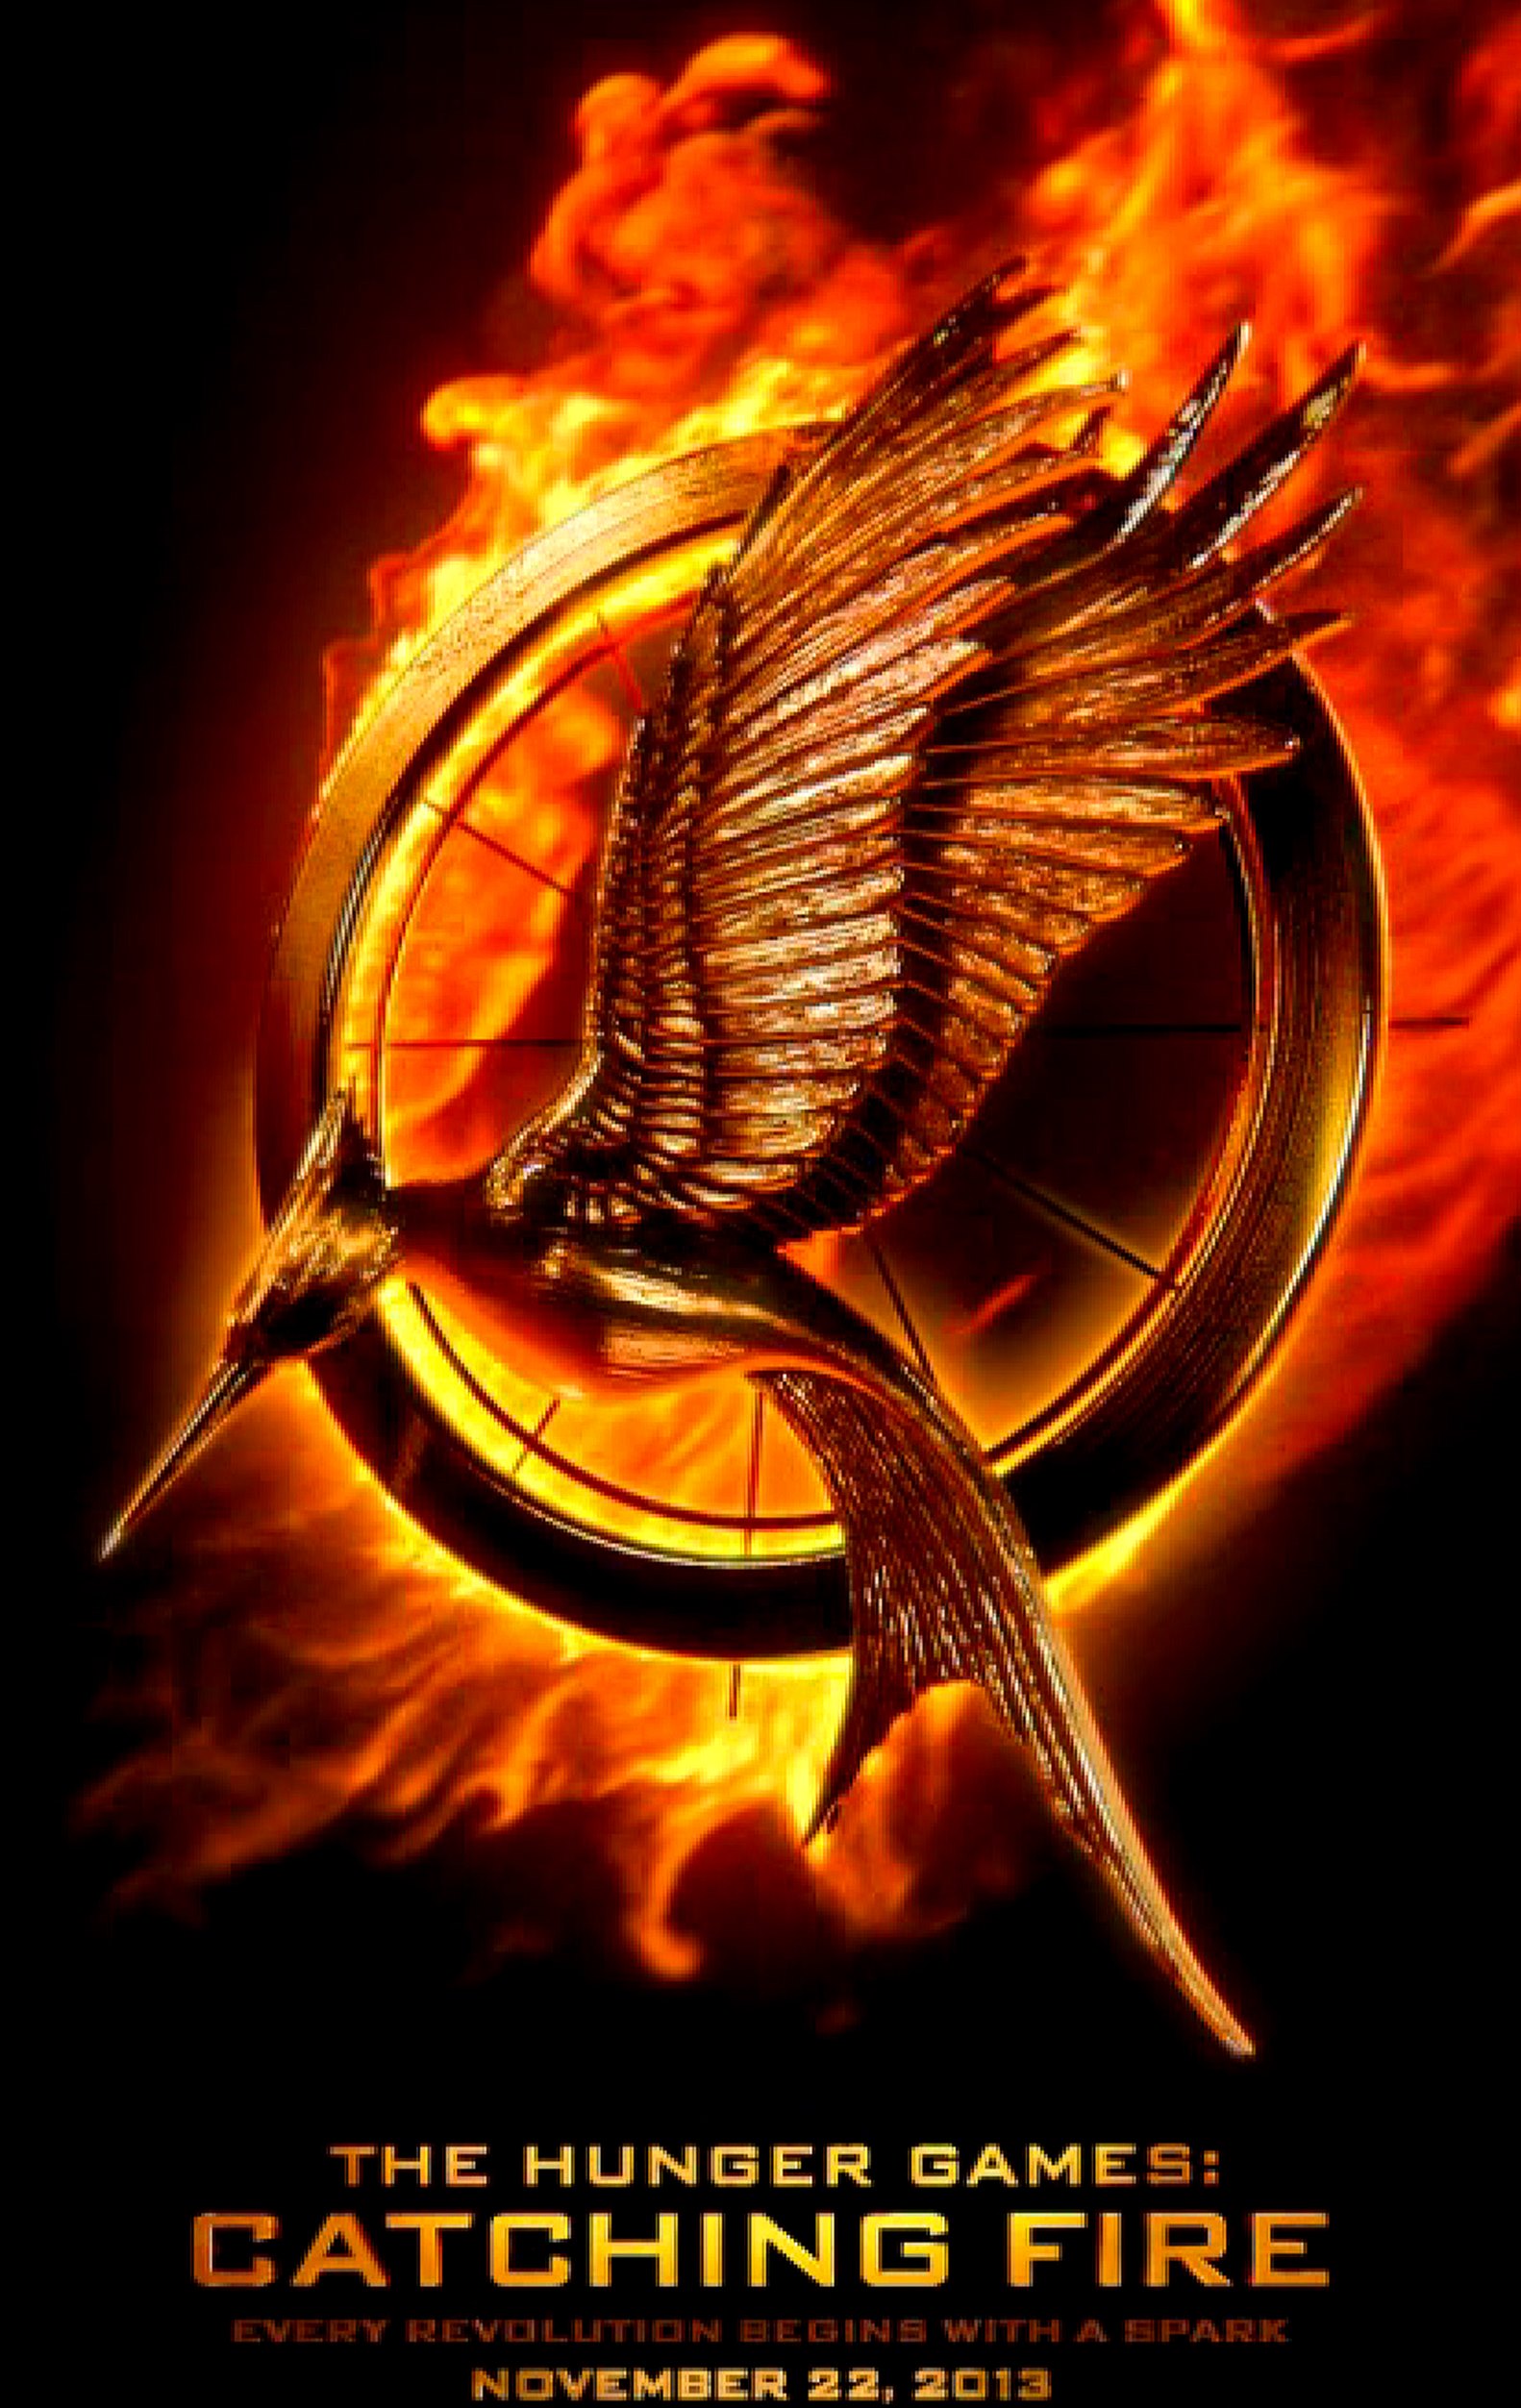 The Hunger Games: Catching Fire instaling